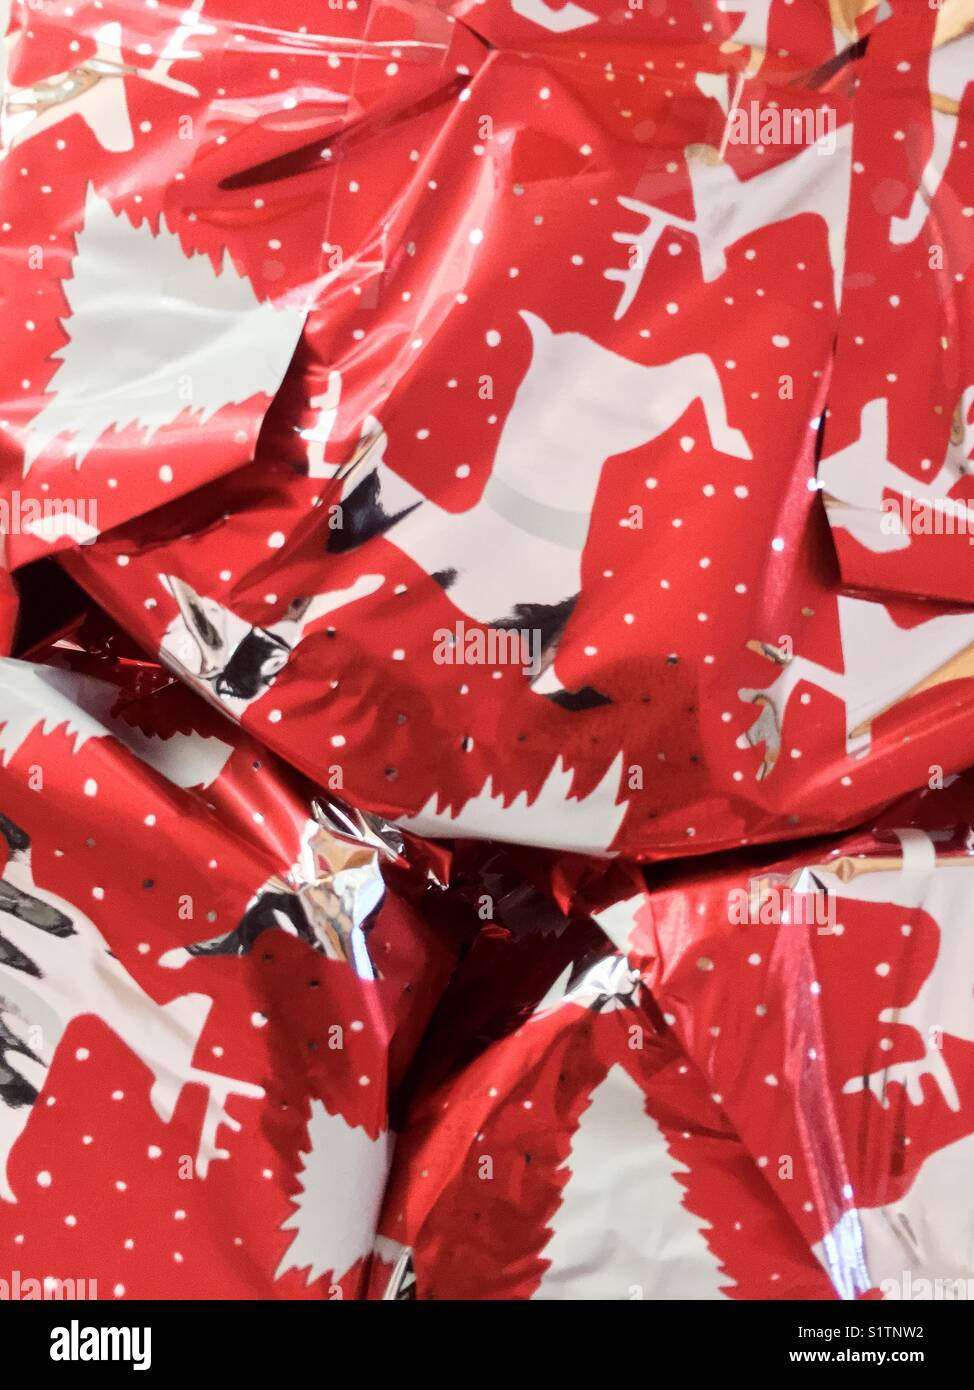 Christmas gift wrapping paper Stock Photo